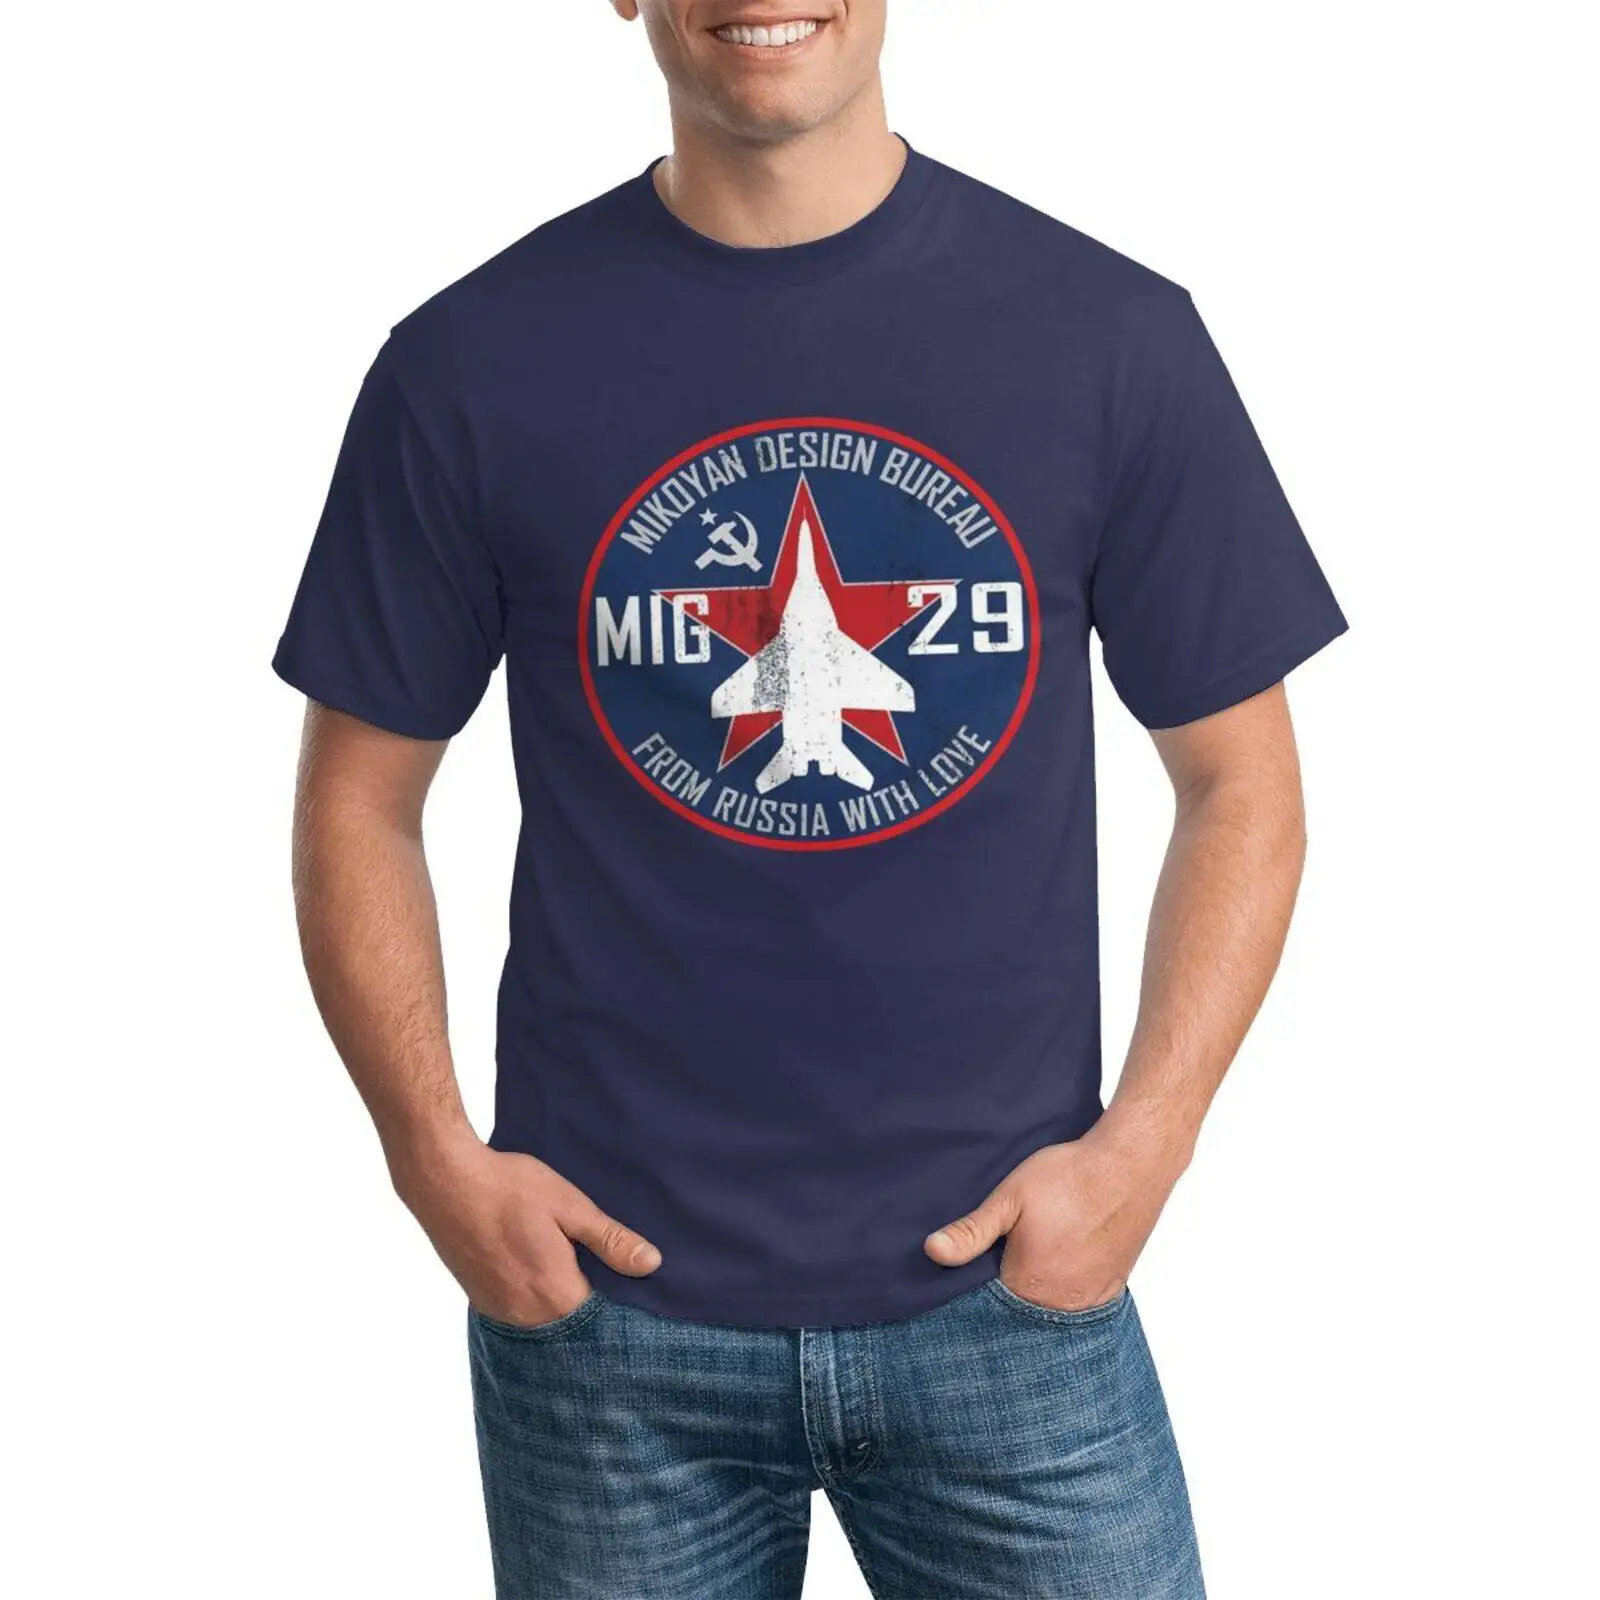 

From Russian With Love Explosion Fighter Jet Mig 29 Cool Cheap Sale Tee Men's 100% Cotton Casual T-shirts Loose Top Size S-3XL